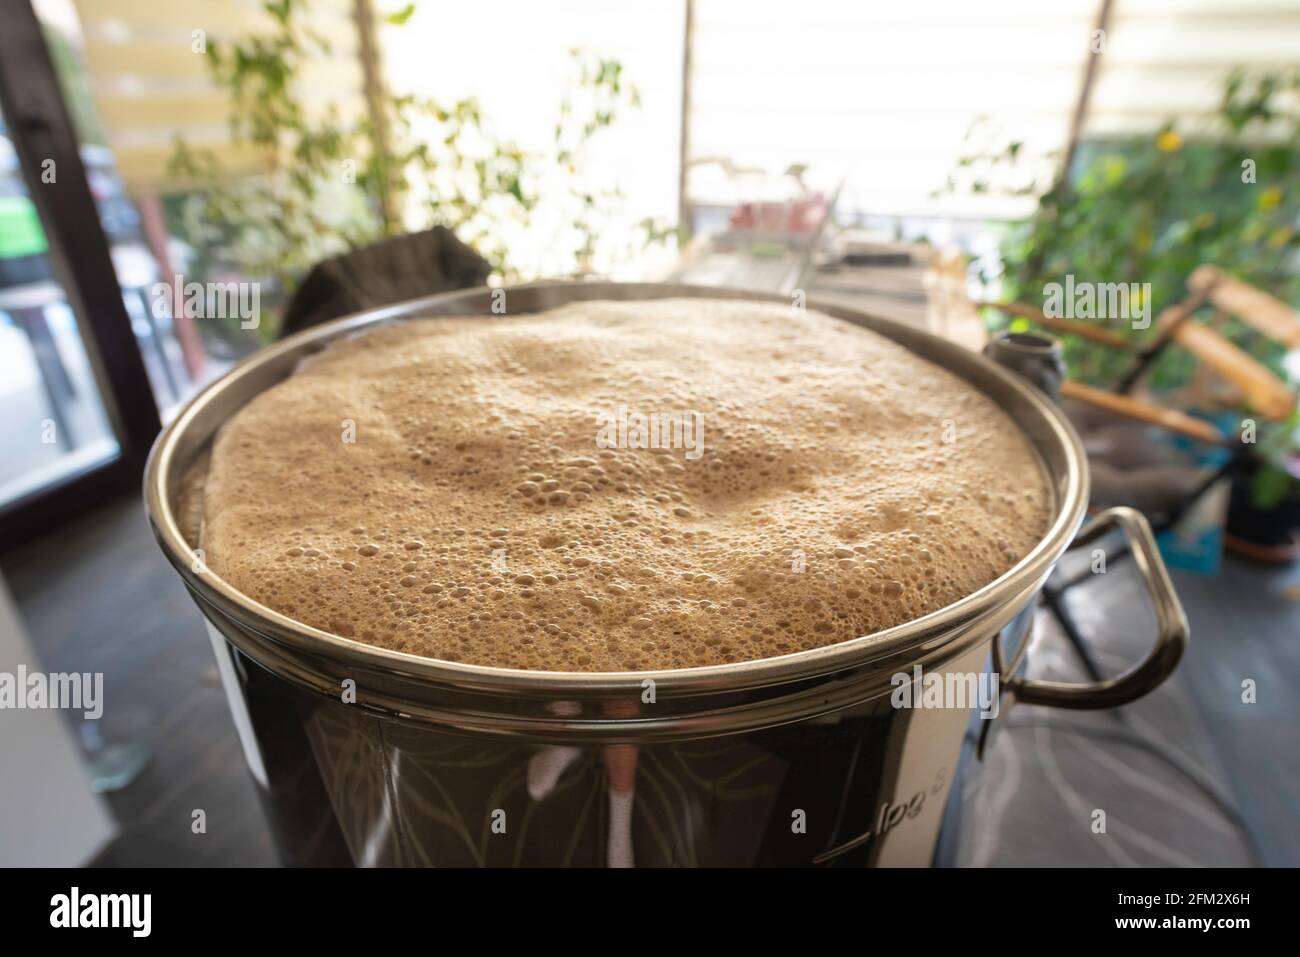 Most home brewers use brewing machines to brew beer at home. Stock Photo